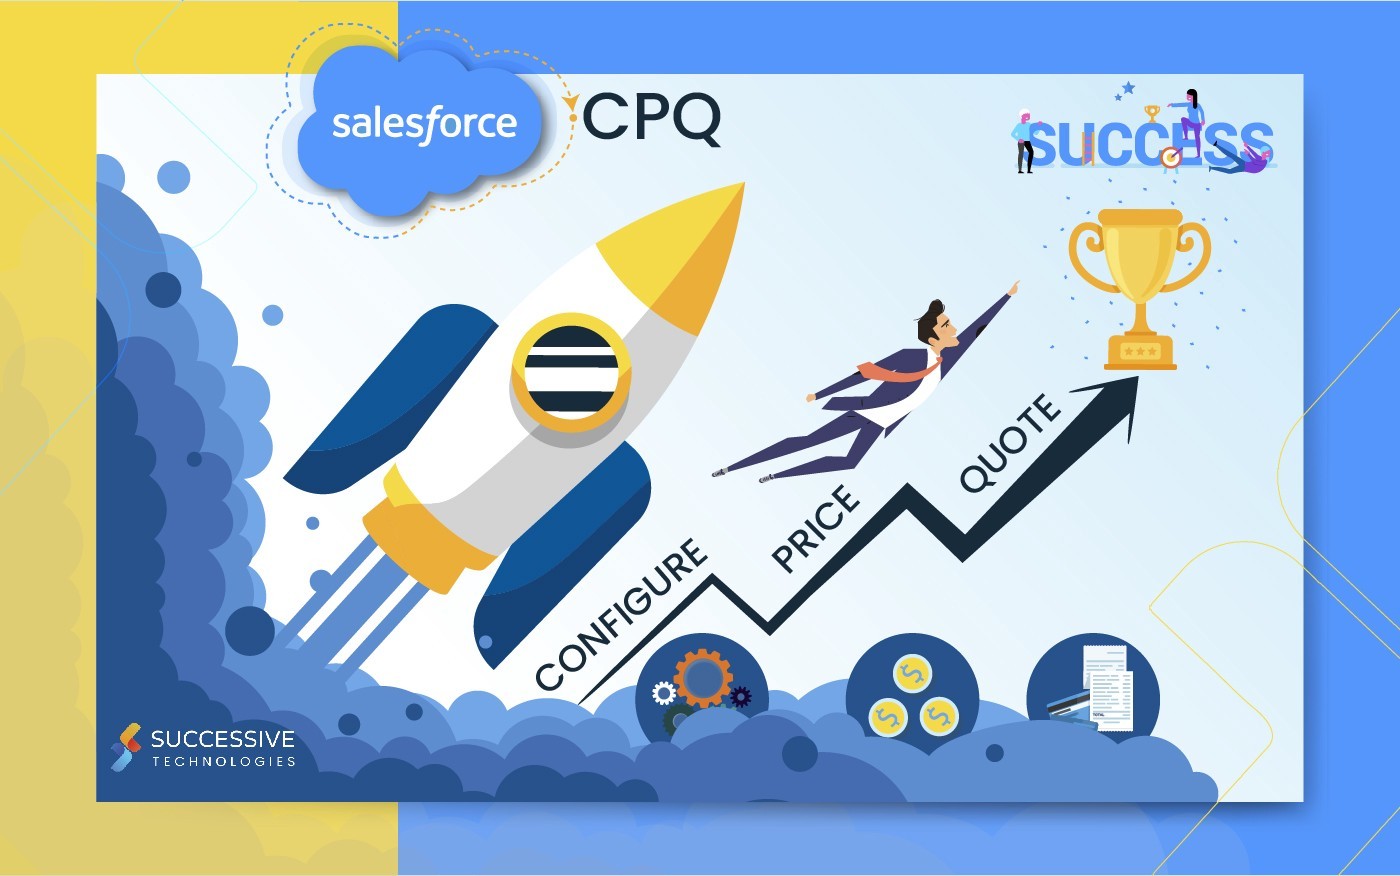 What is Salesforce Billing & CPQ?